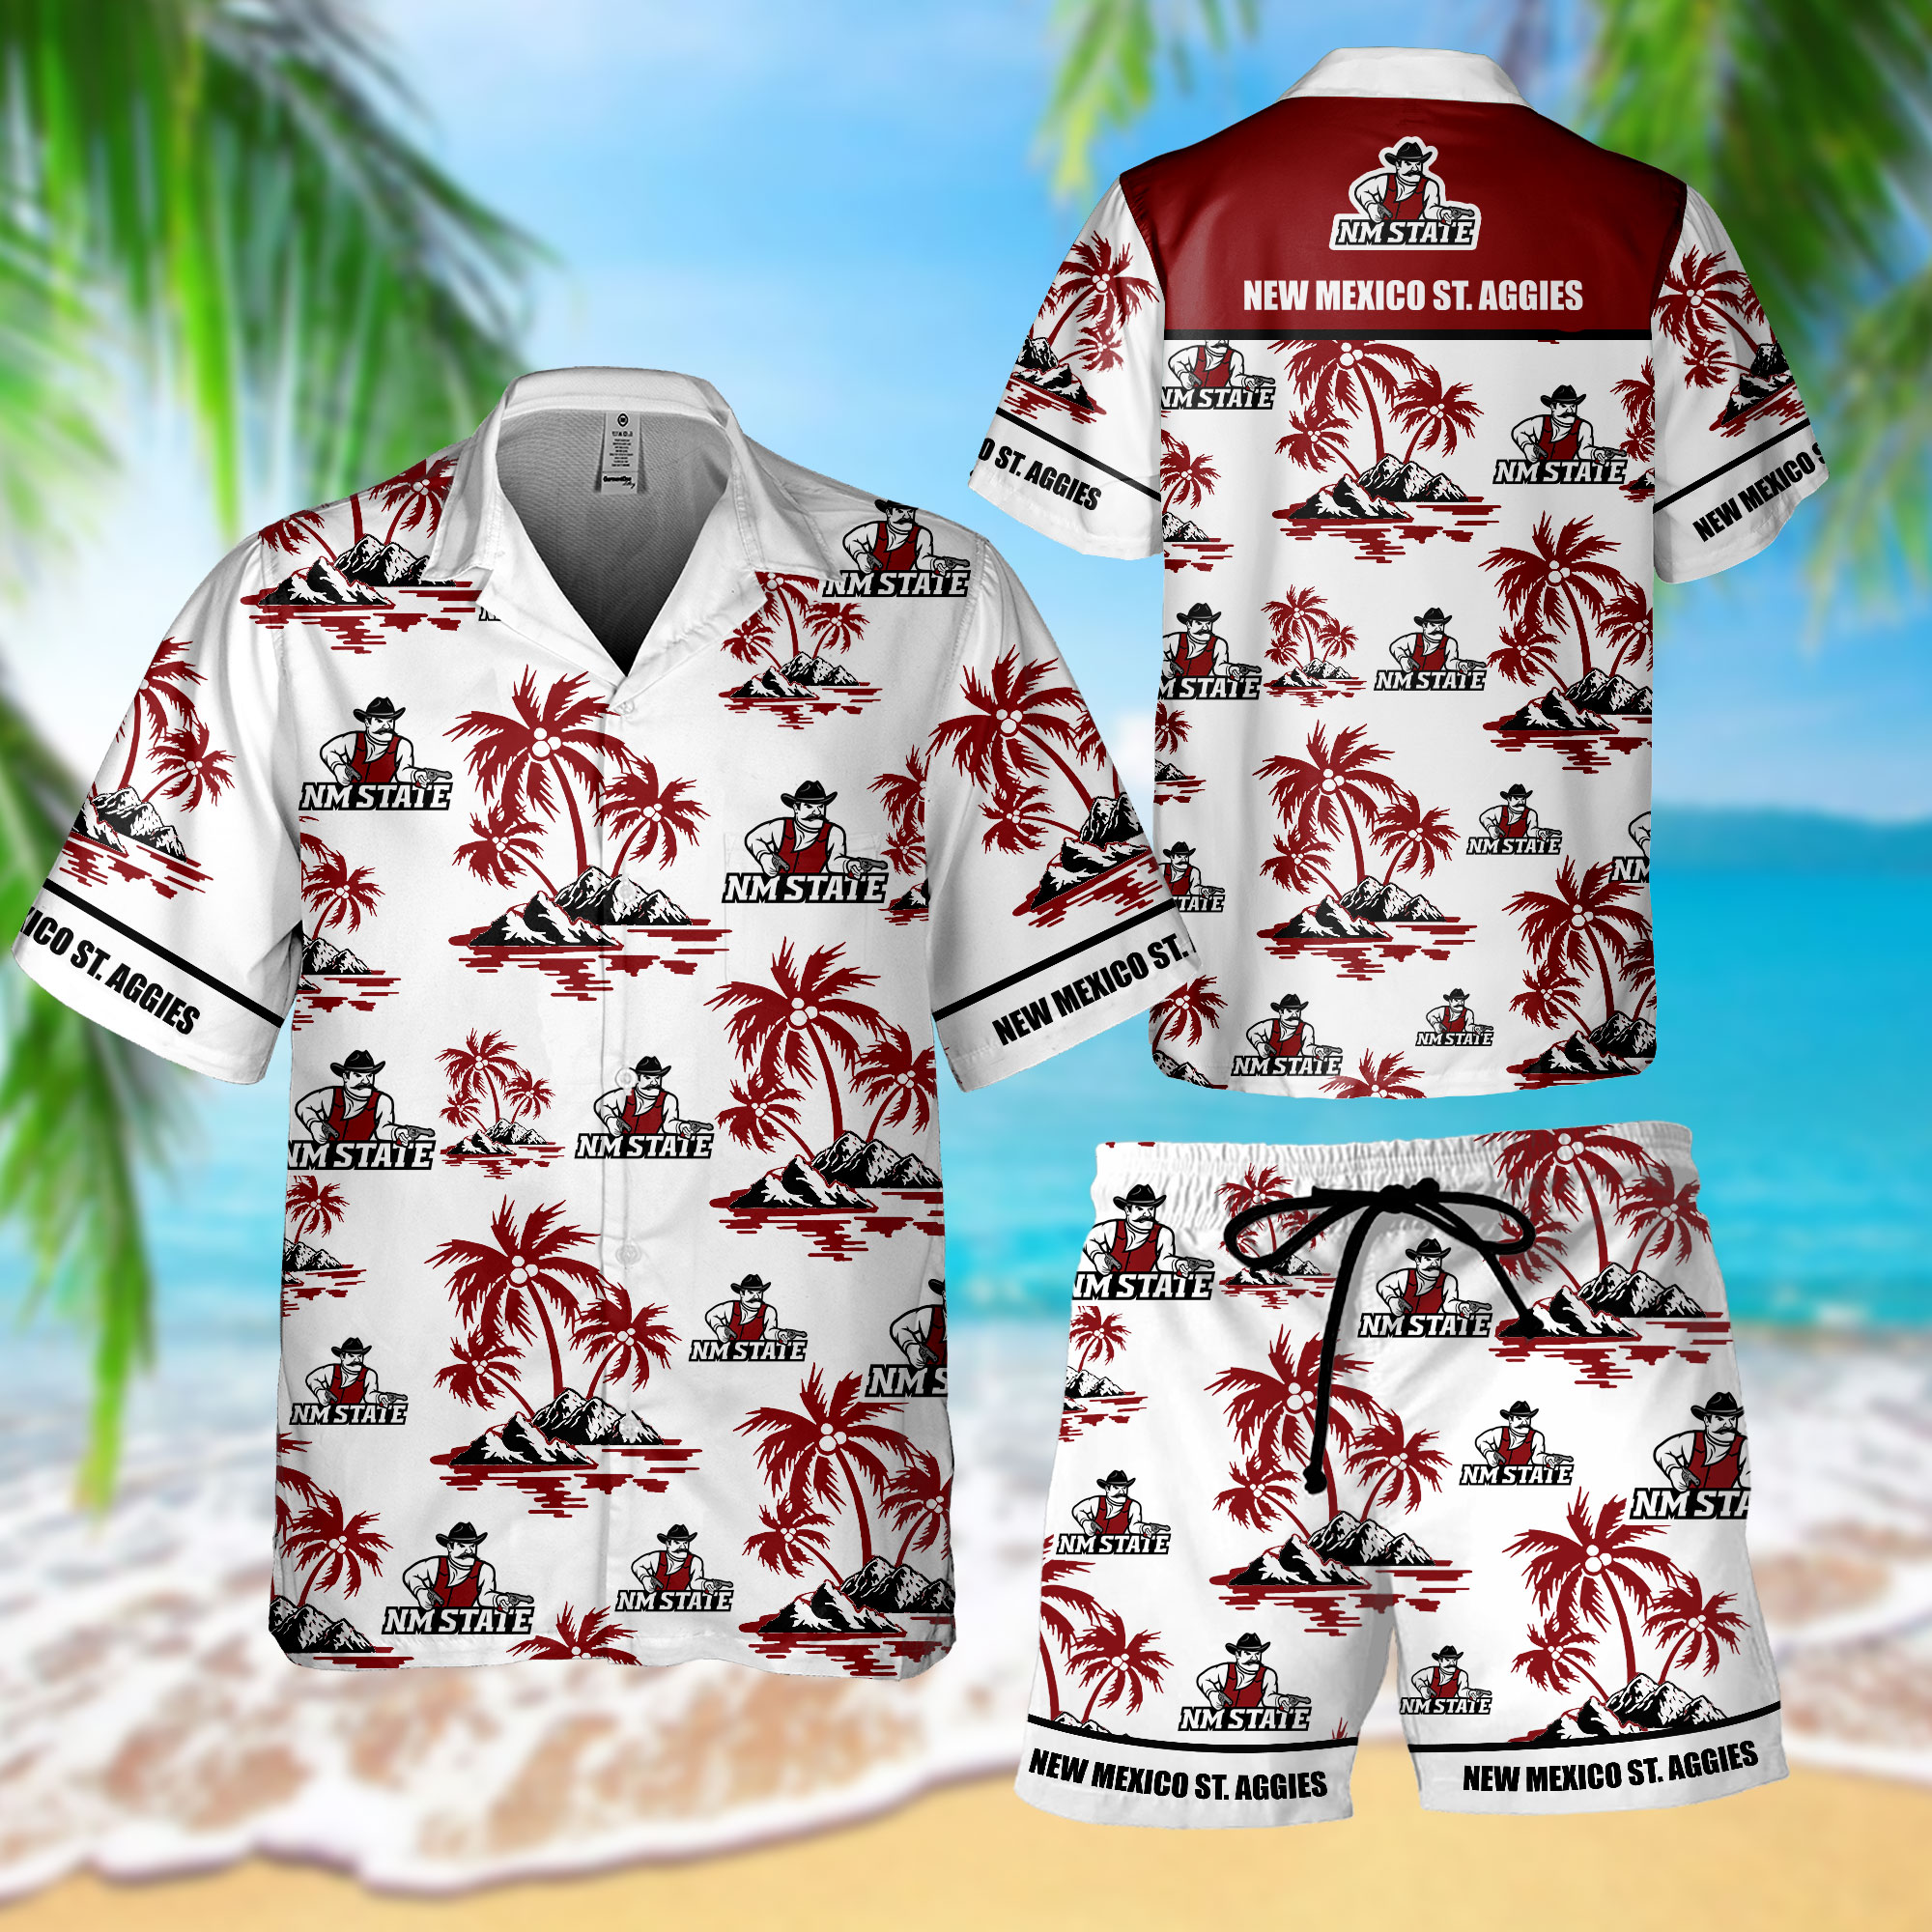 Let me show you about some combo hawaiian shirt so cool in this weather 93